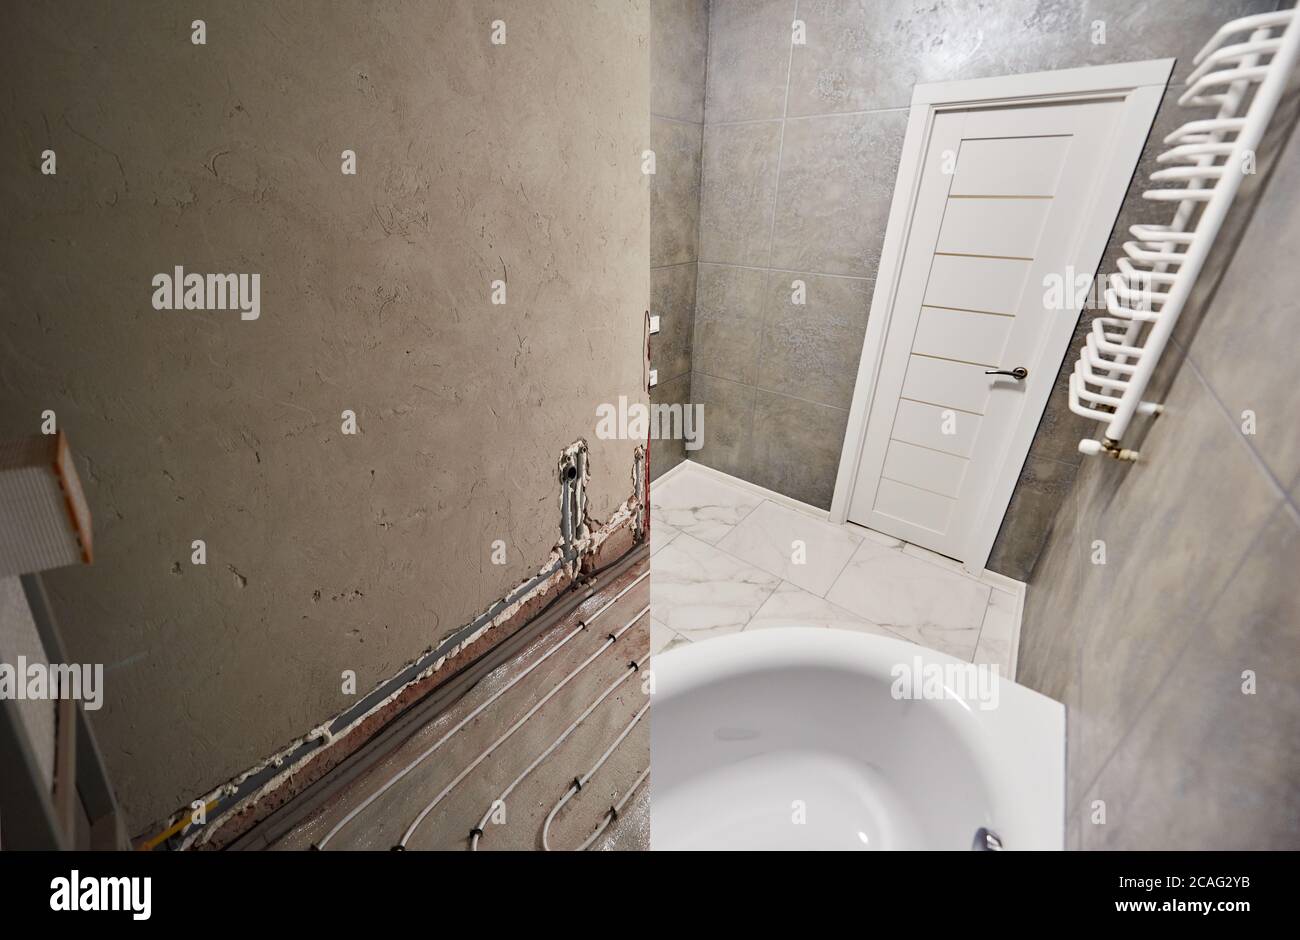 Modern bathroom with marble floor and white door before and after refurbishment. Comparison of old restroom with underfloor heating pipes and new bathroom with heated towel rail and while bathtub. Stock Photo